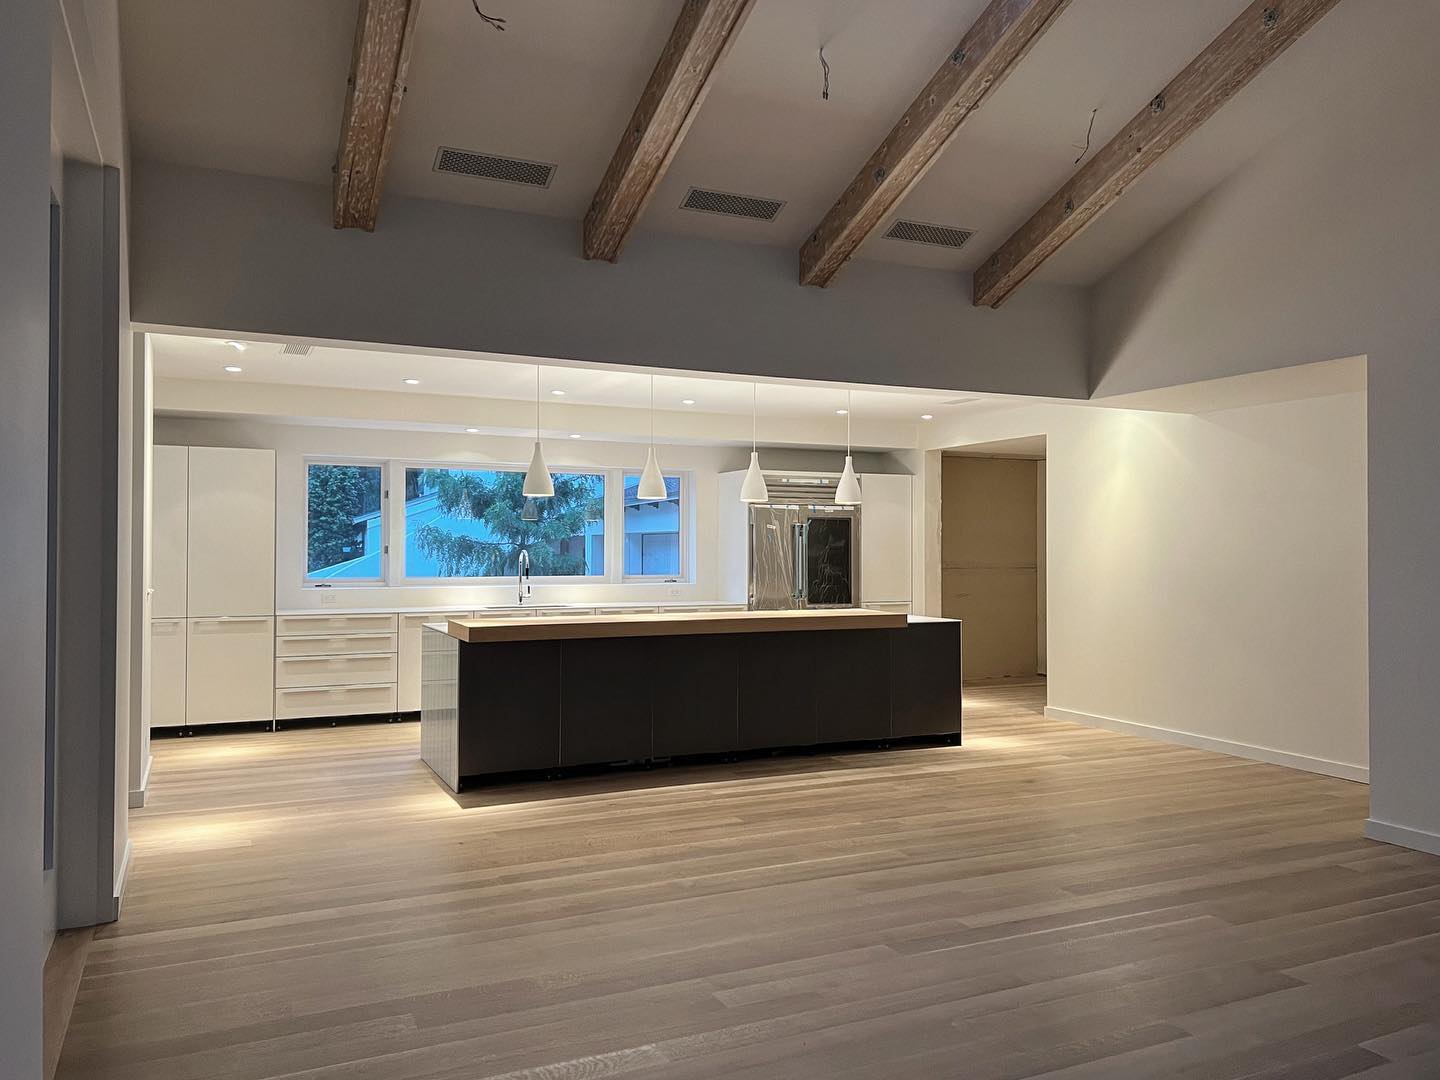 Just checking some of the projects at night, pure and simple. The best kitchens made….. #scottgillendesign #private #gated feel free to fill the description